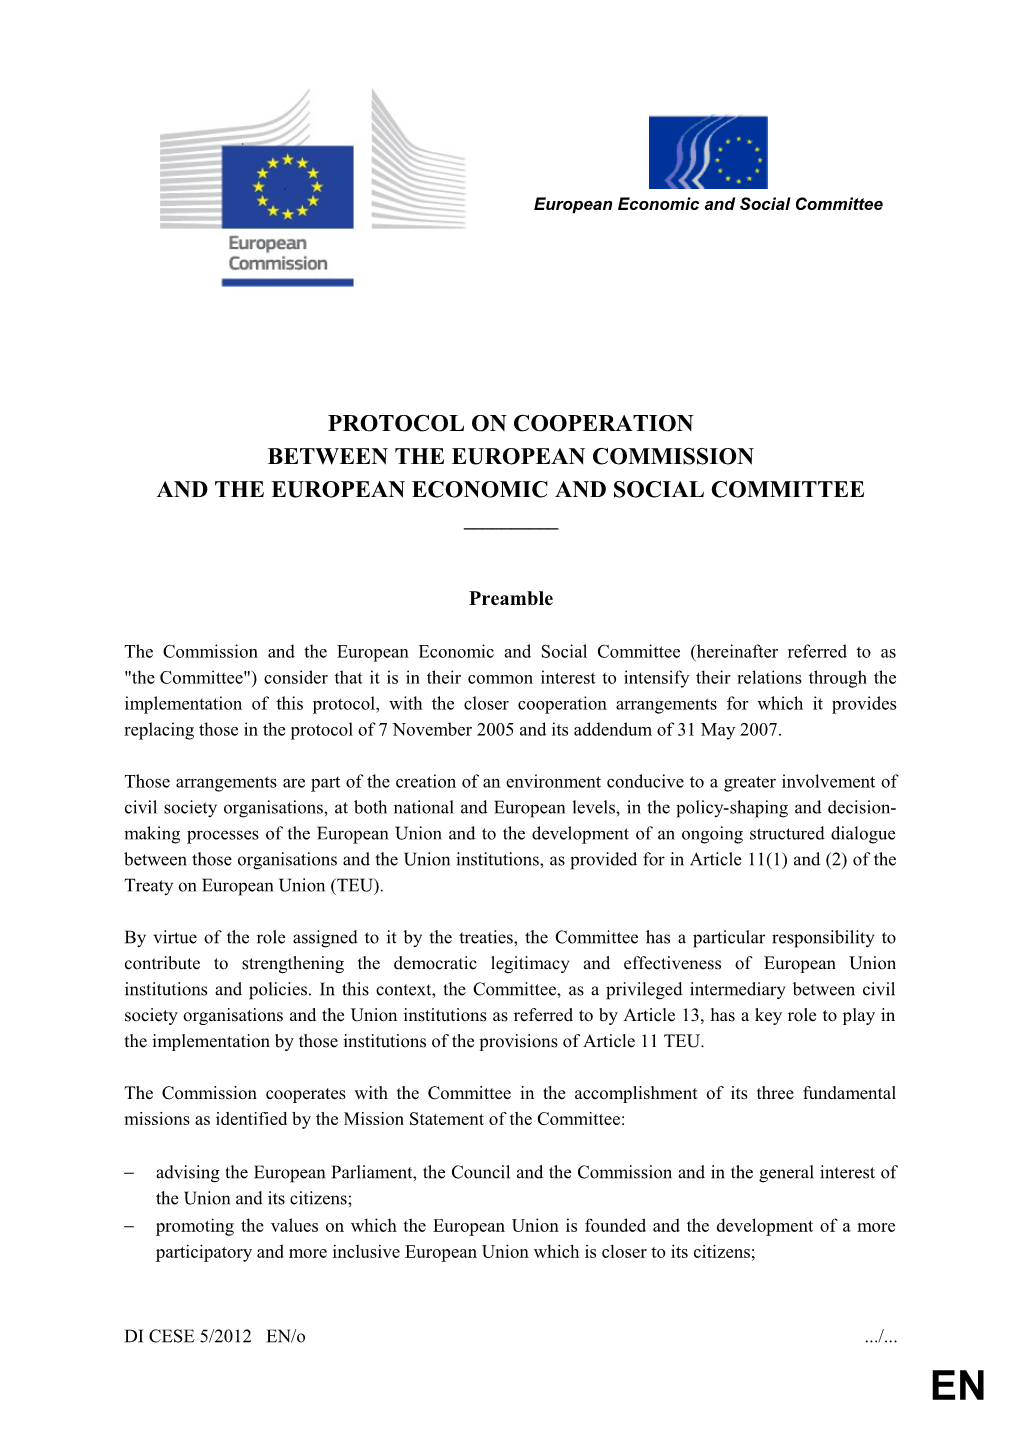 PROTOCOL on COOPERATION - EC and EESC